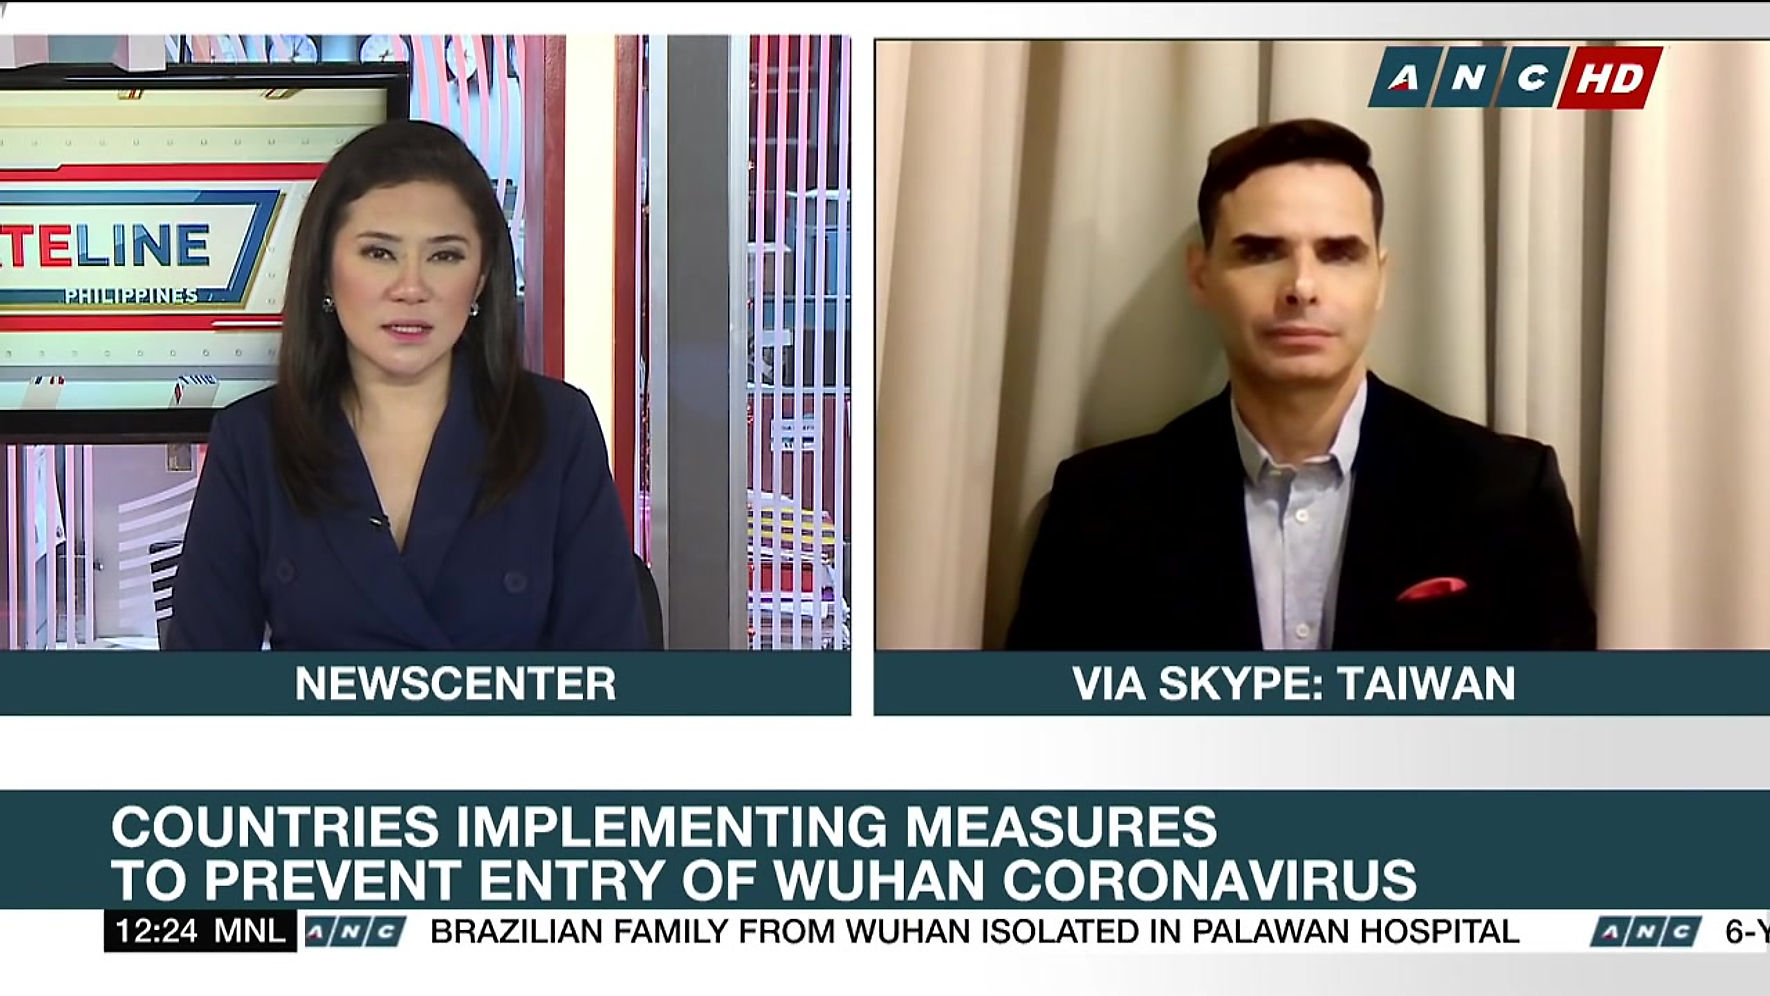 SafePro Comment on ANC: Asian Governments Responding To Wuhan Coronavirus Outbreak